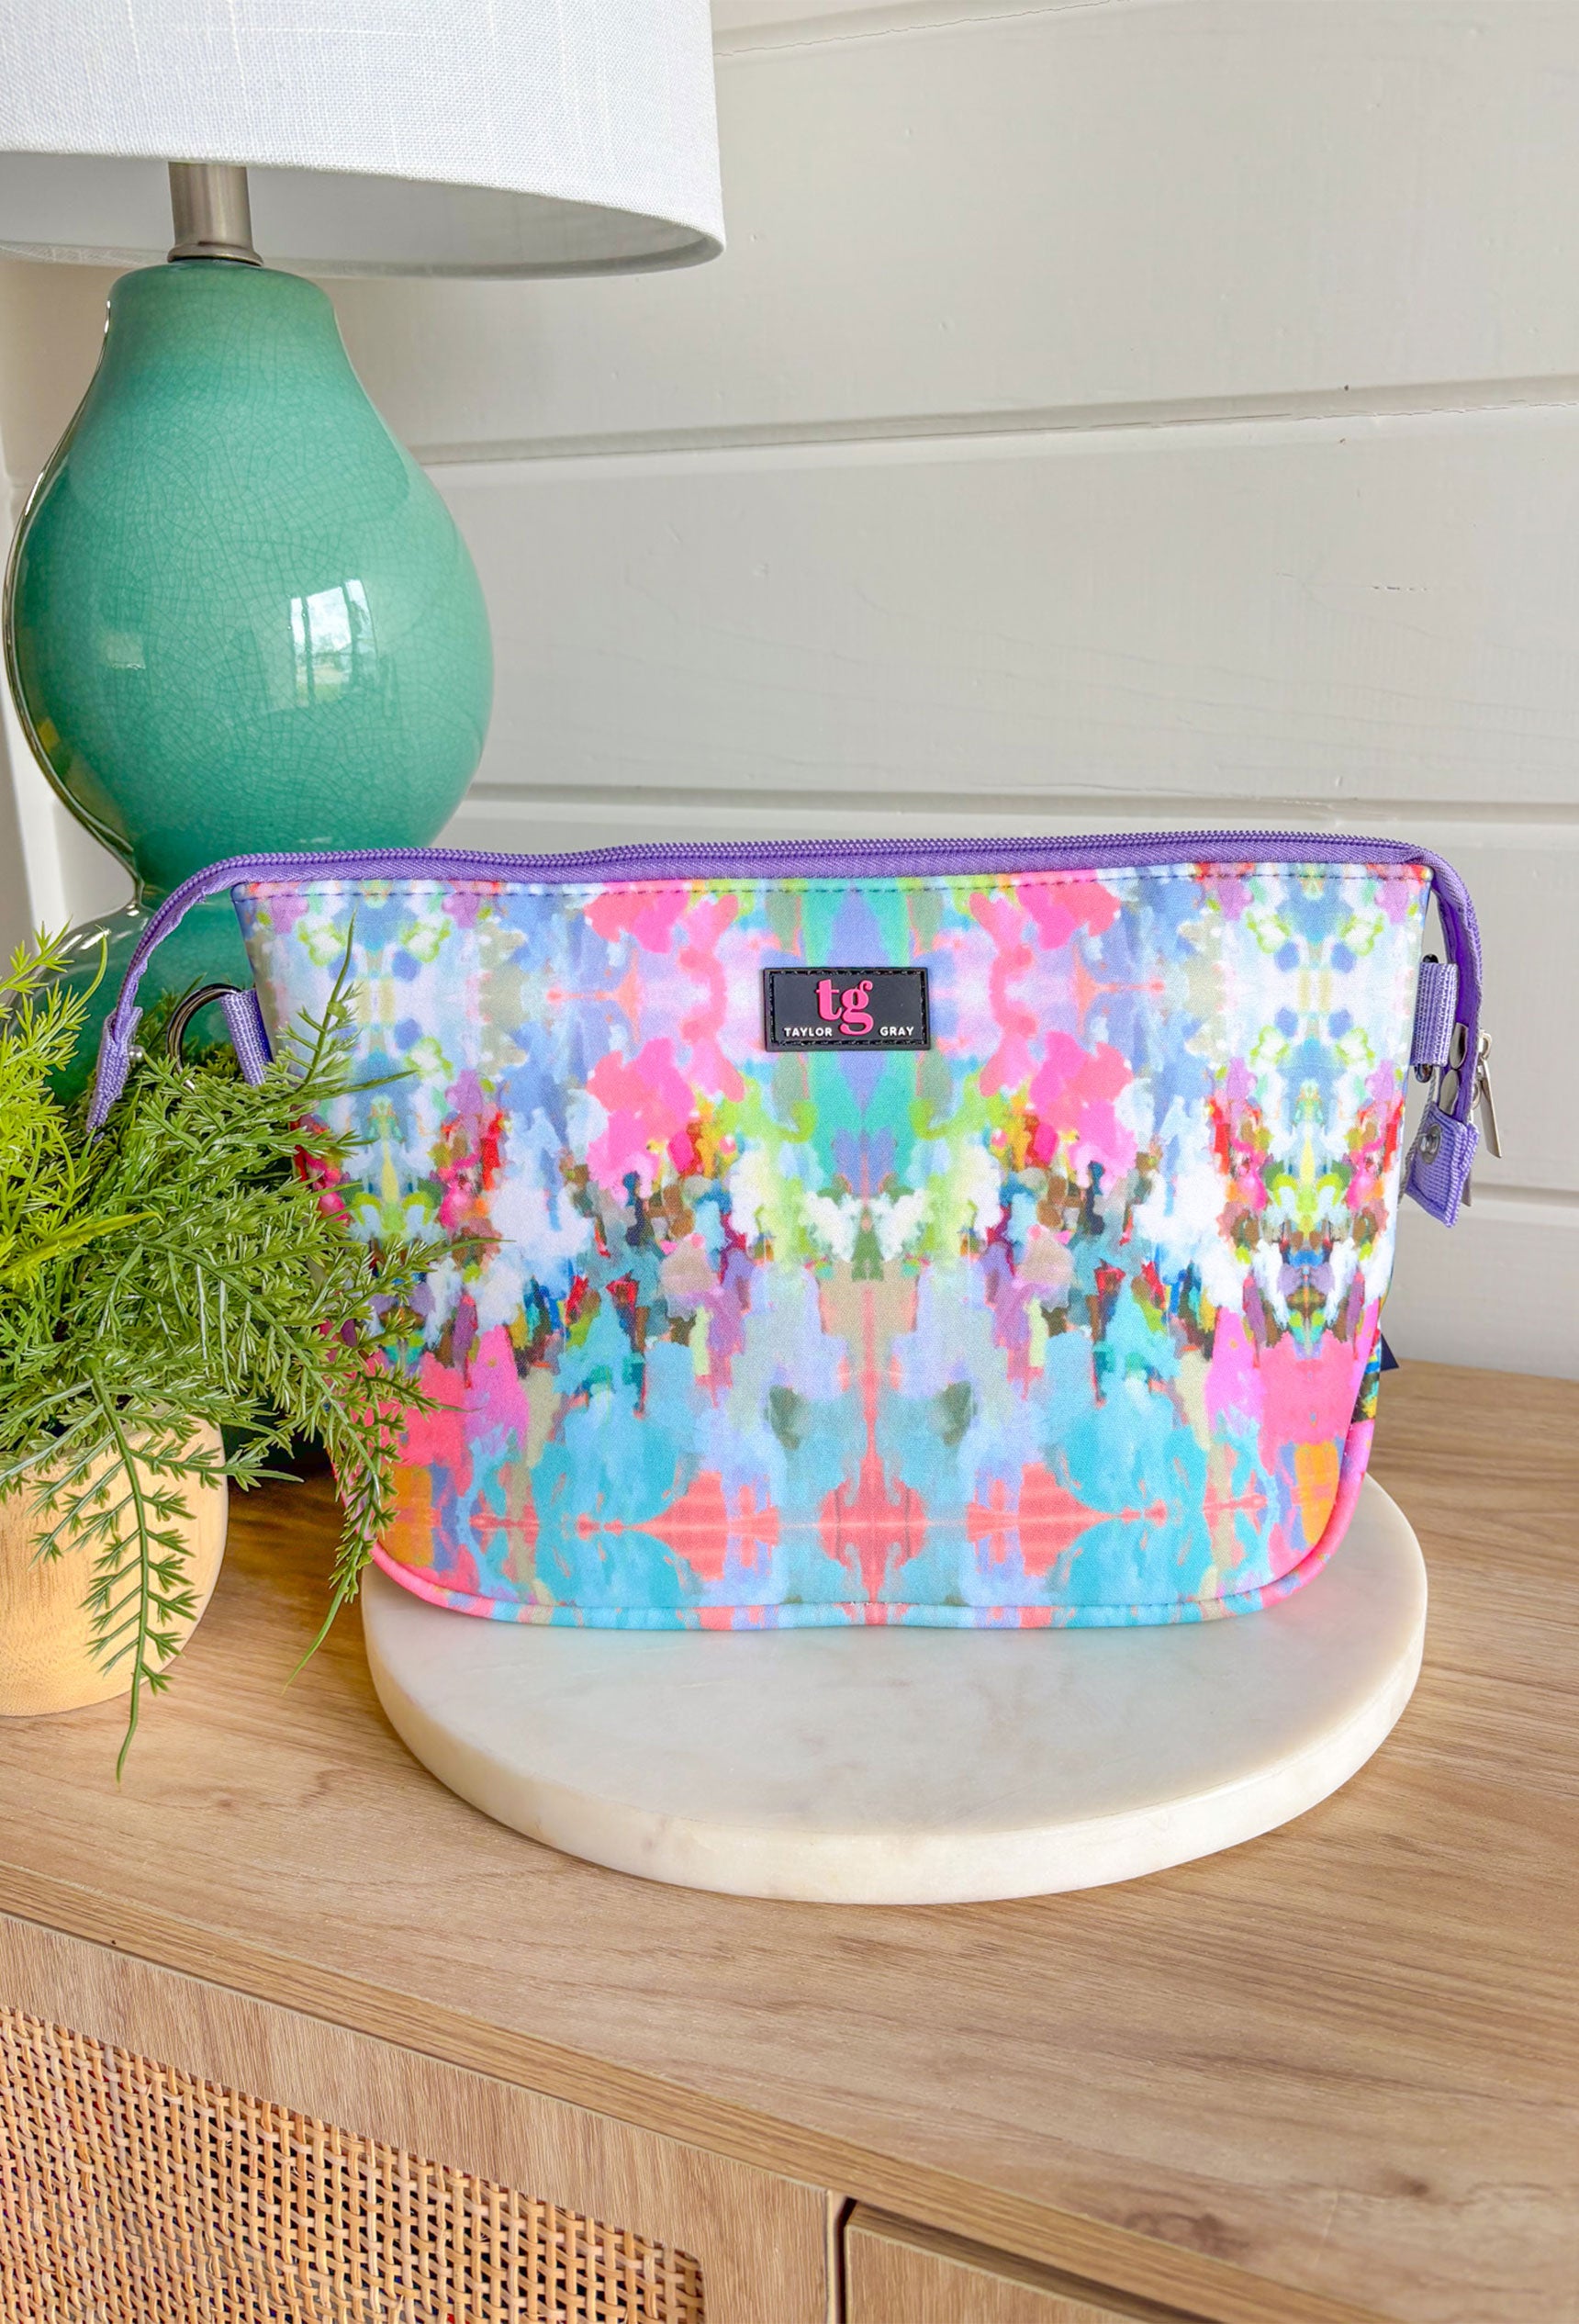 The Brooks Avenue Laura Park Neoprene Large Cosmetic, large cosmetic pouch with double zipper in the "The Brooks Avenue" Patter in the colors lilac, bubblegum pink, lime green, turquoise, blue, orange, sage and off white